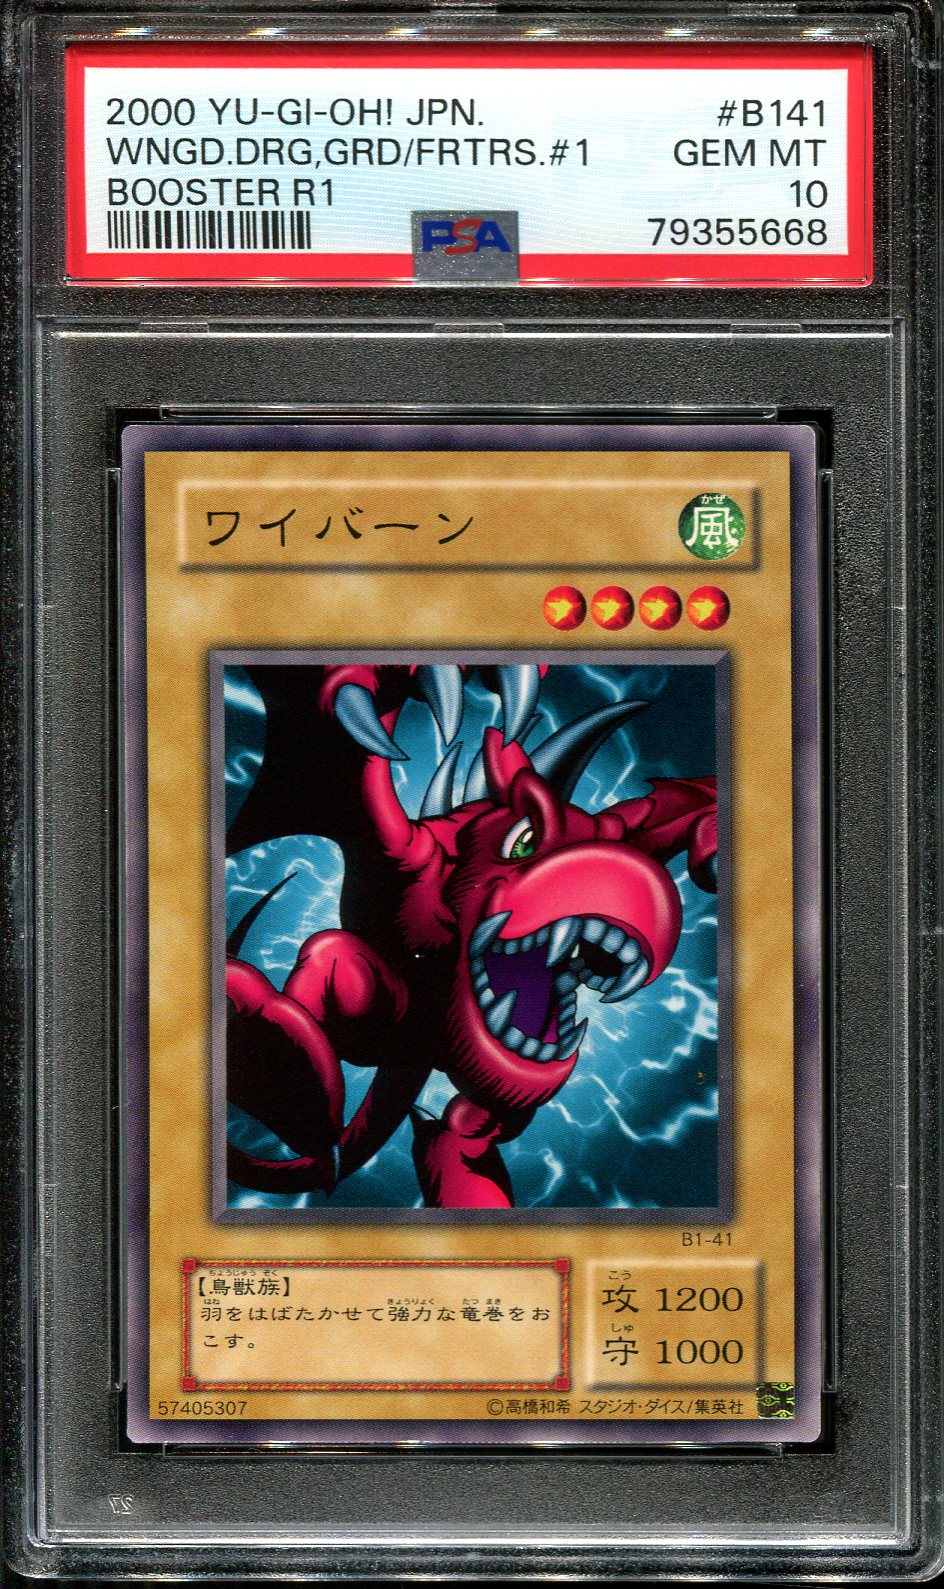 YUGIOH - PSA 10 - WINGED DRAGON GUARDIAN OF THE FORETRESS #1 - B1-41 - BOOSTER R1 - JAPANESE OCG